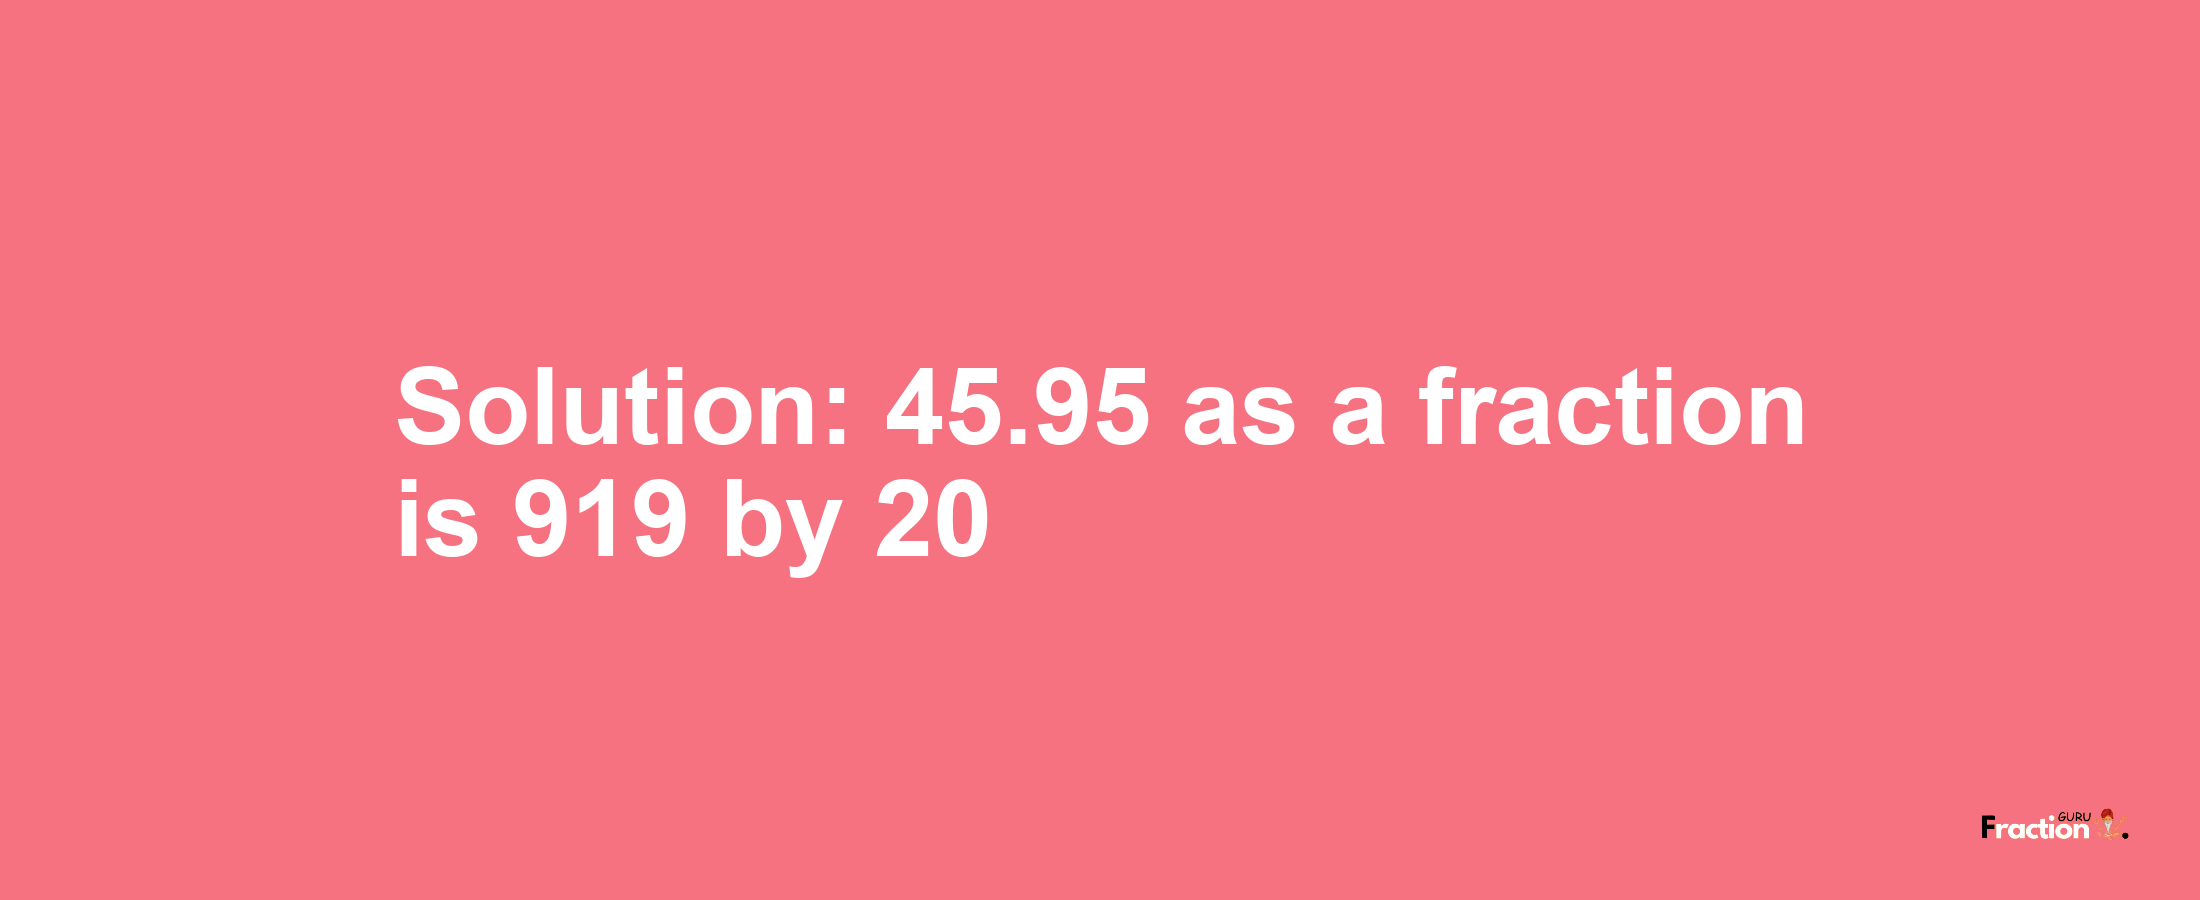 Solution:45.95 as a fraction is 919/20